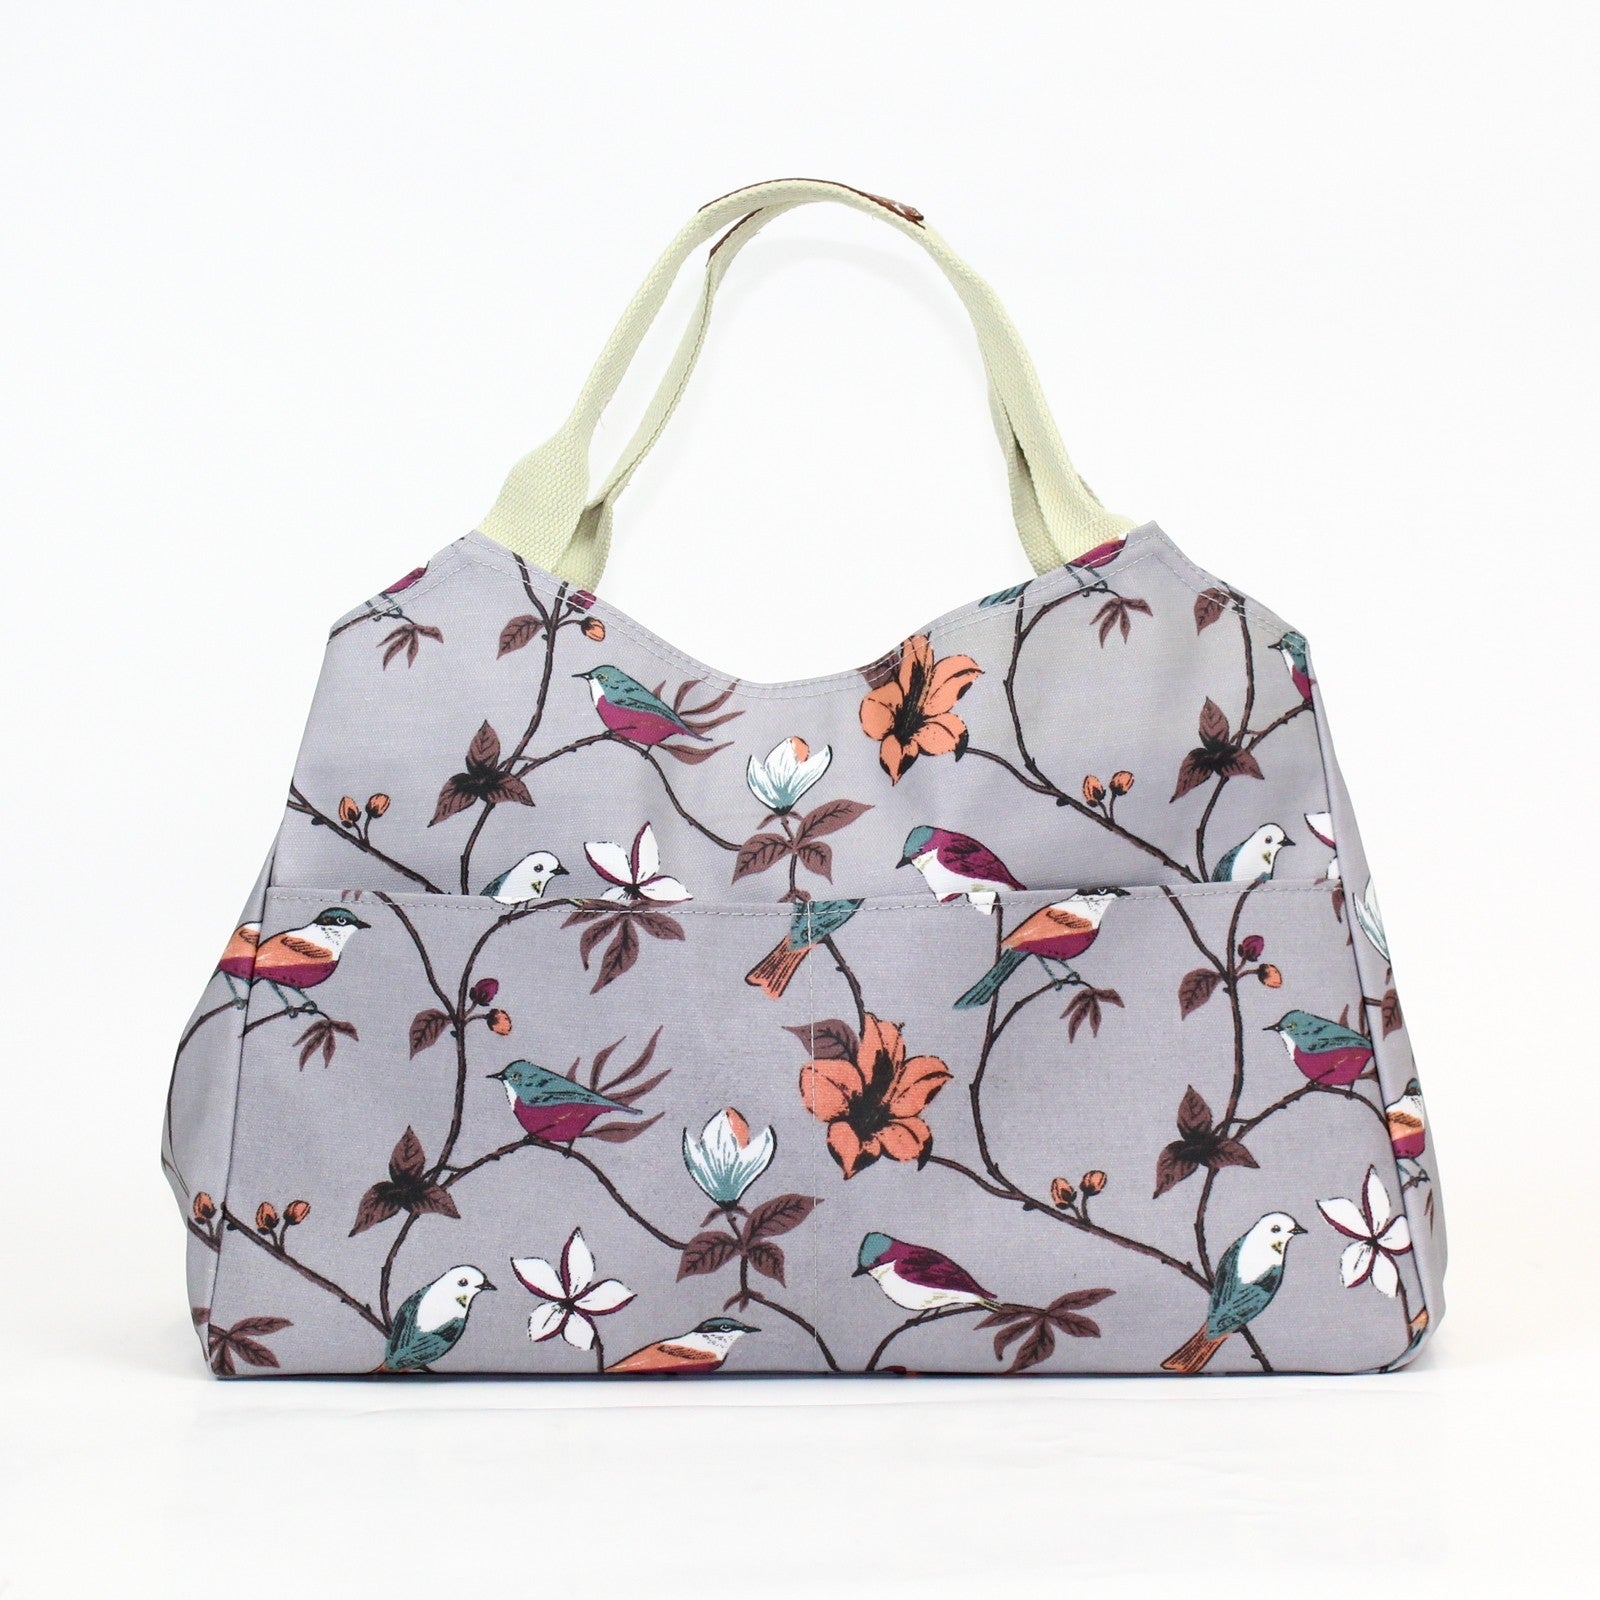 Gorgeous bird and flower print multi-functional day bag on a grey coloured background.